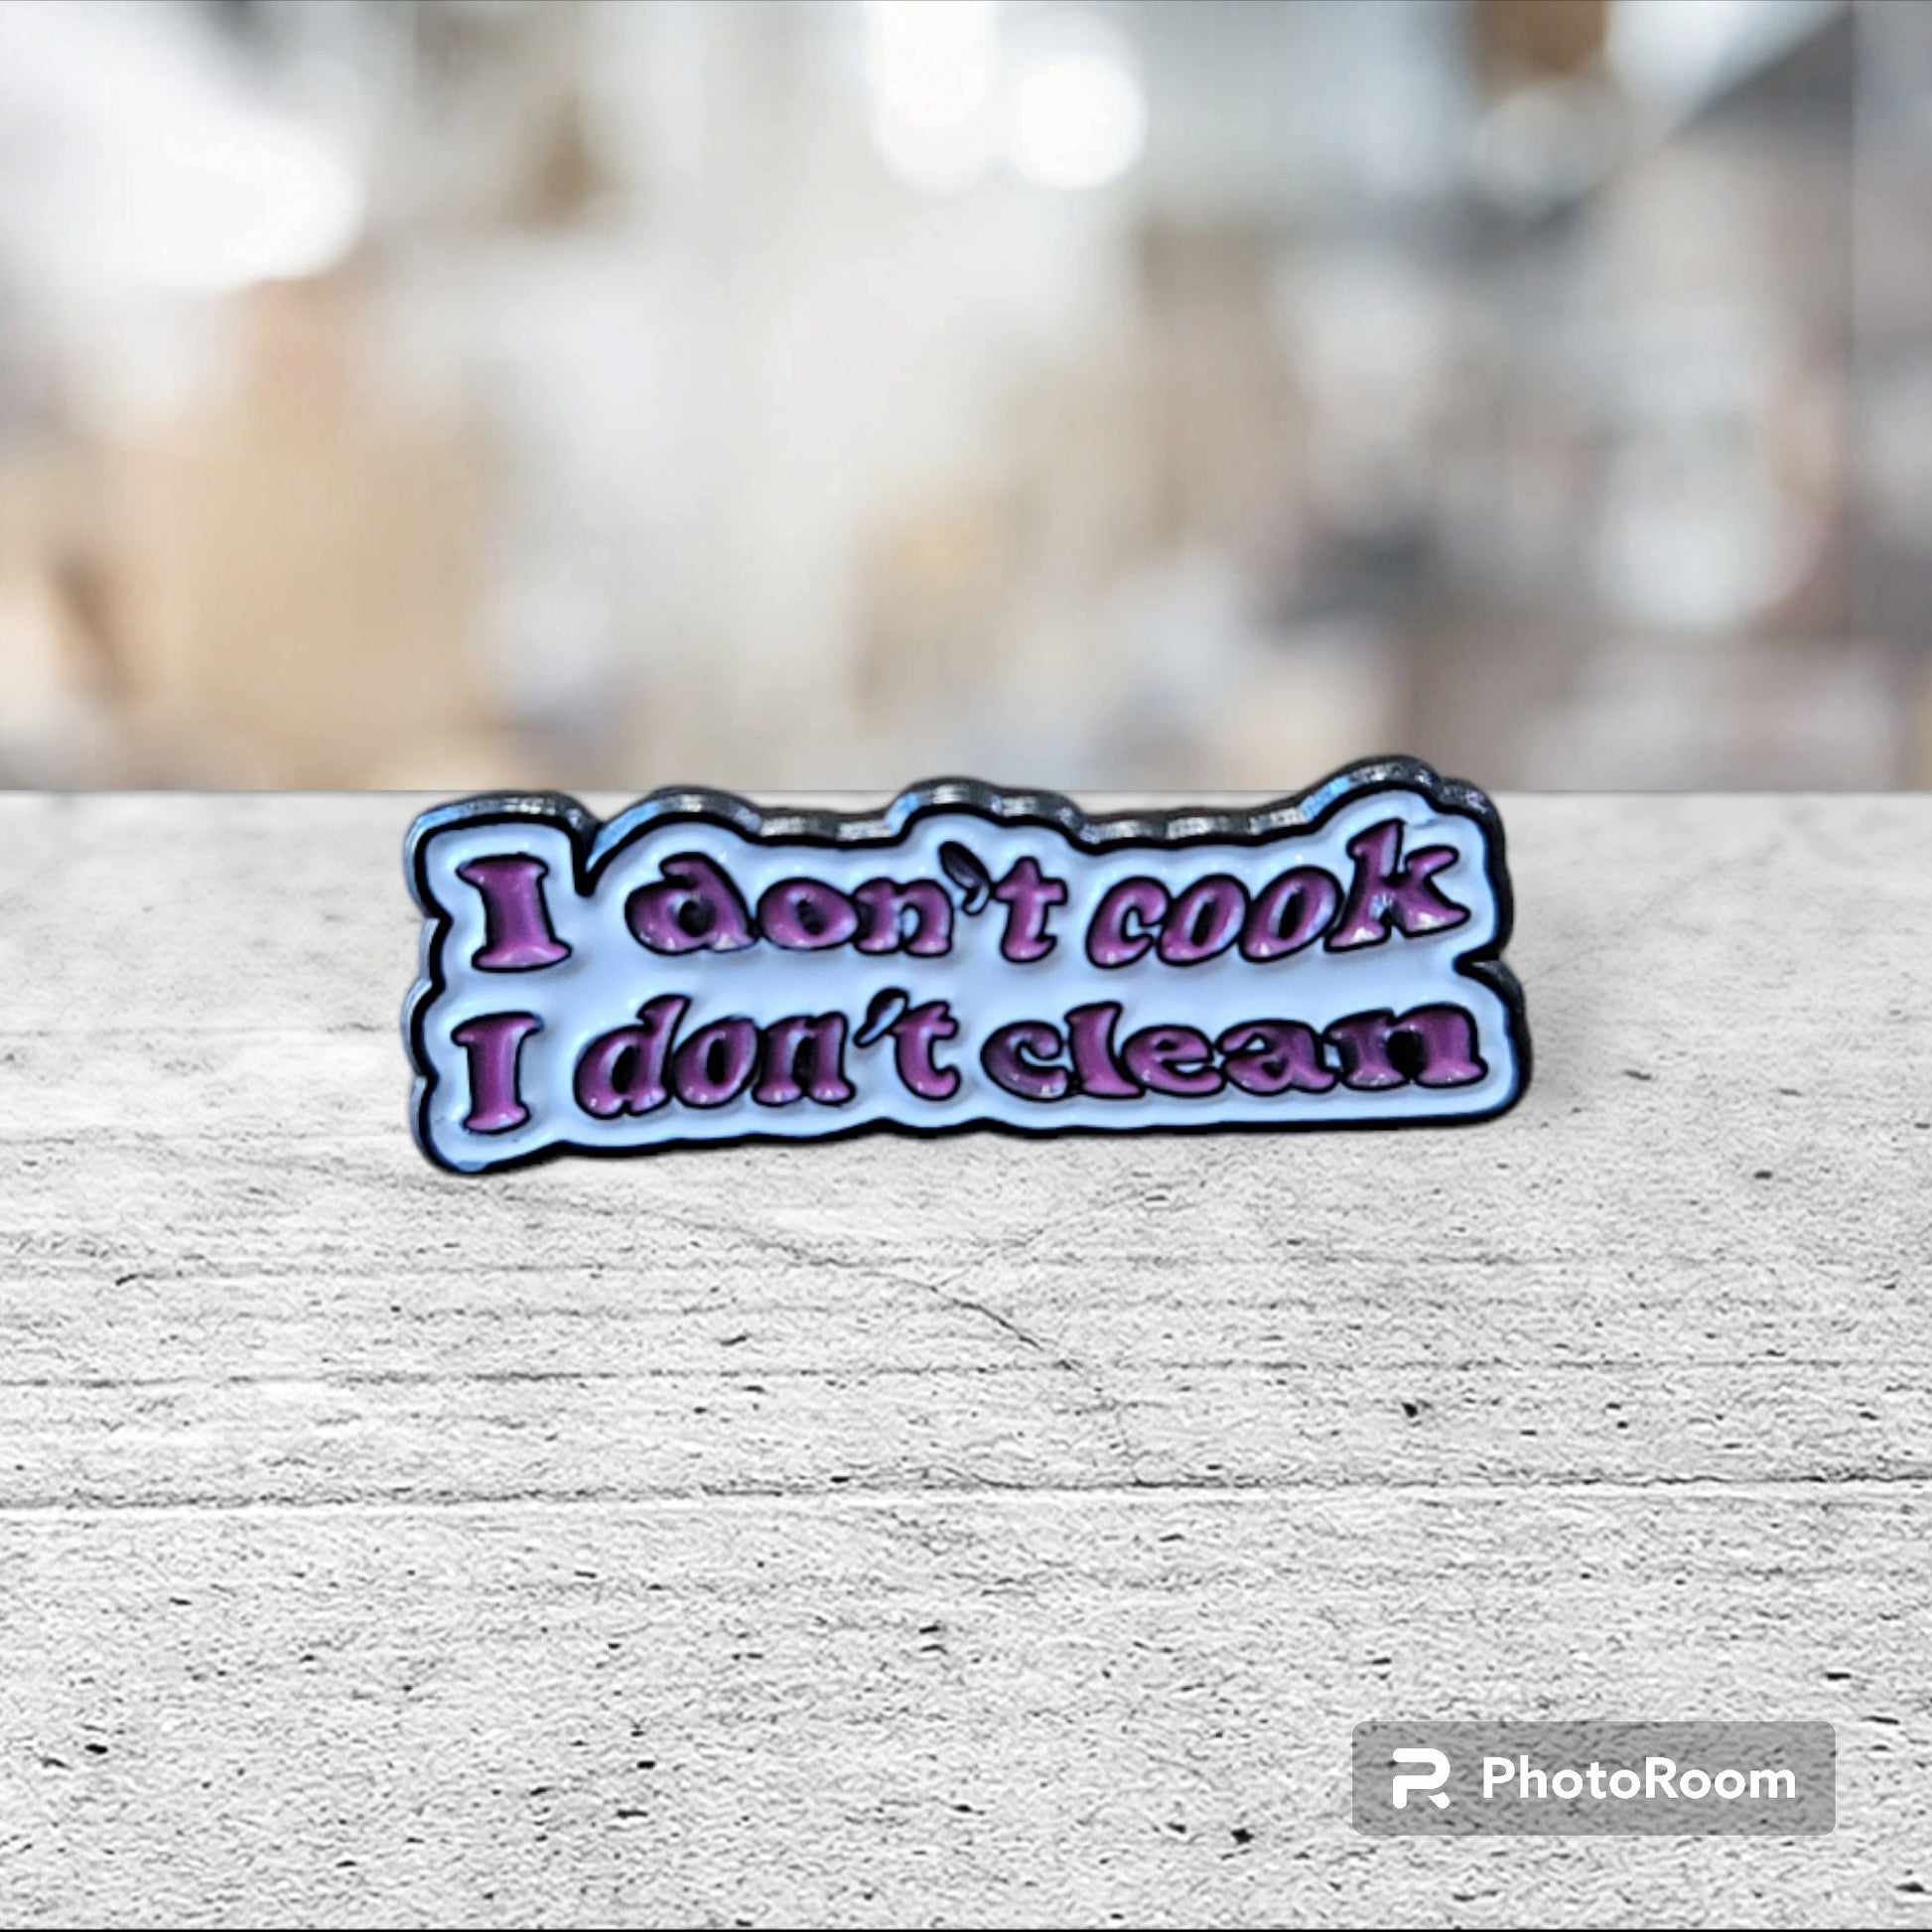 I don't cook, I don't clean enamel pin